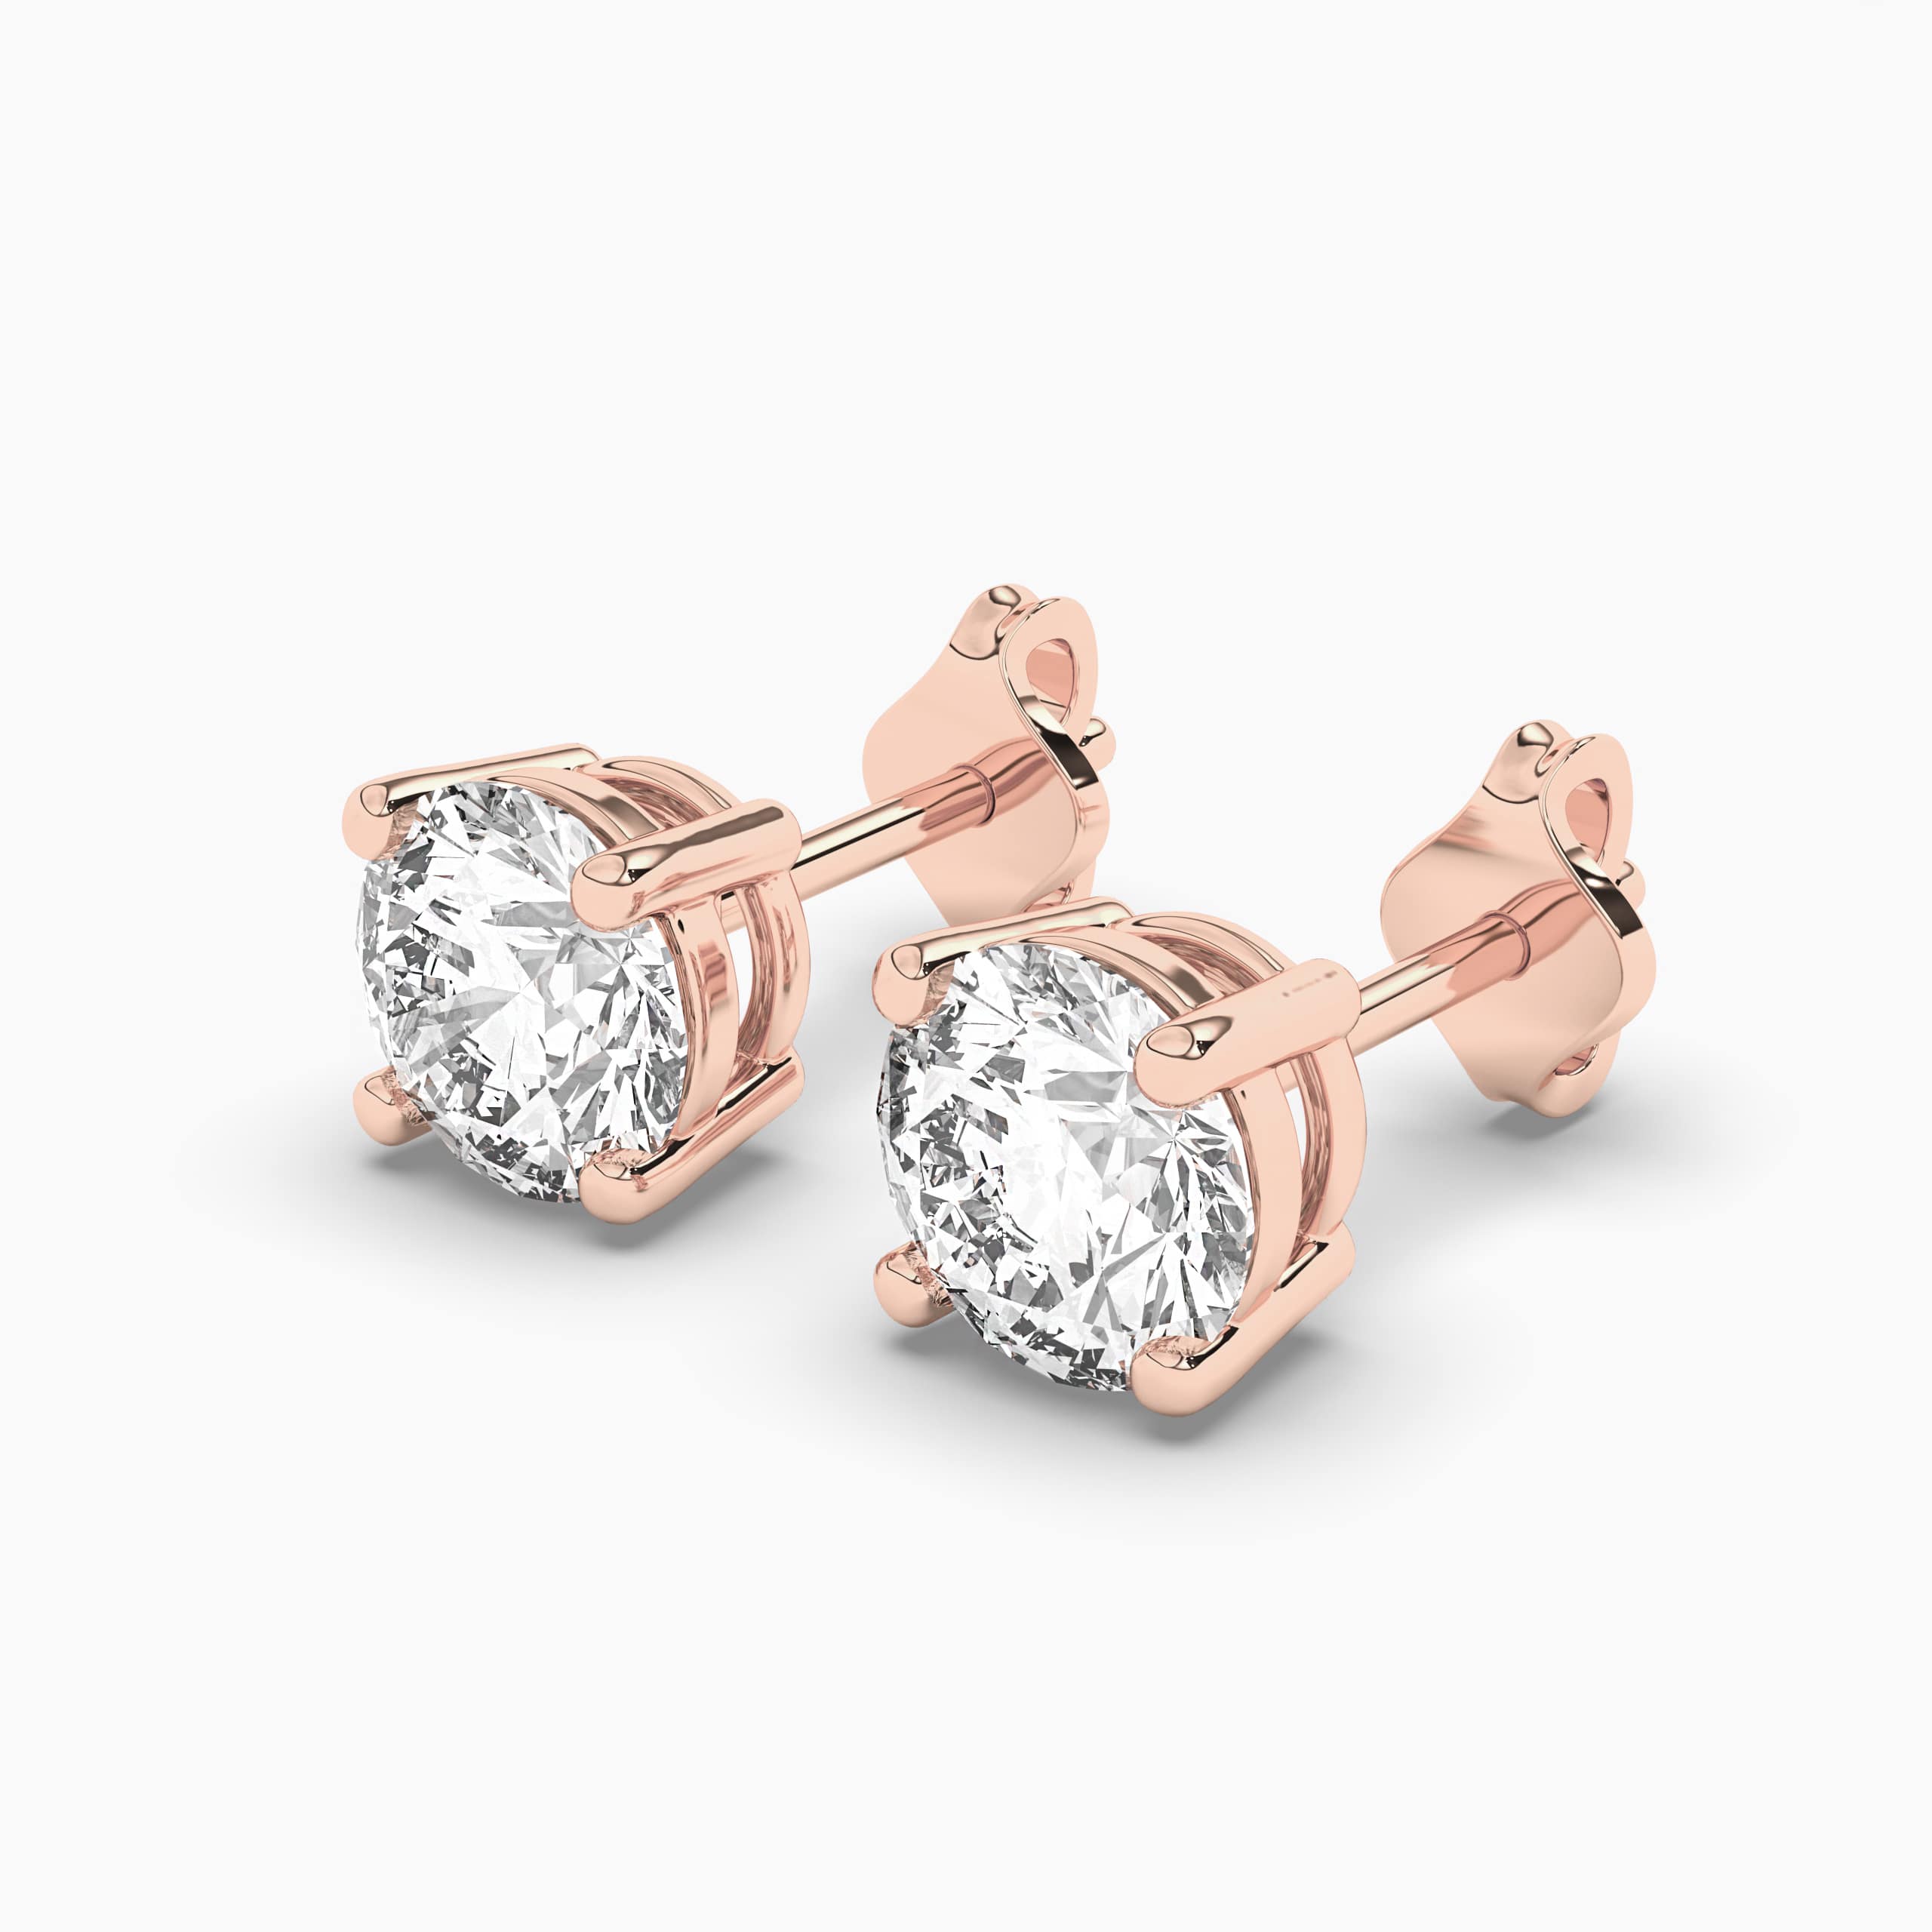 ROSE GOLD SOLITAIRE STUD EARRINGS FOR WOMAN'S